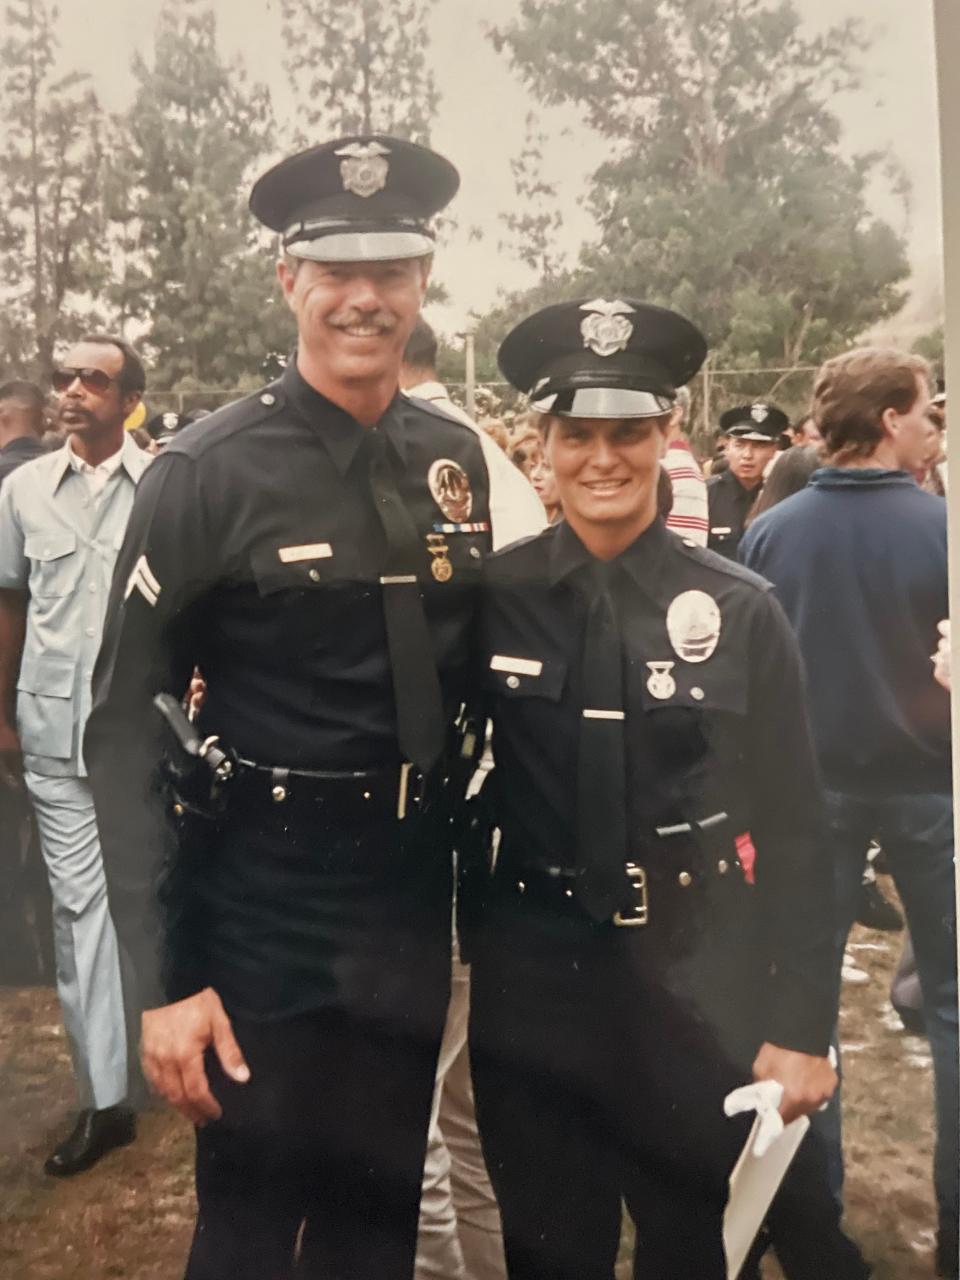 After serving in the U.S. Army, Ruth Crowe, right, moved to Los Angeles and joined the LAPD. She was an officer when five days of riots broke out across the city in reaction to the verdict acquitting four white police officers in the beating of Rodney King, a Black man.